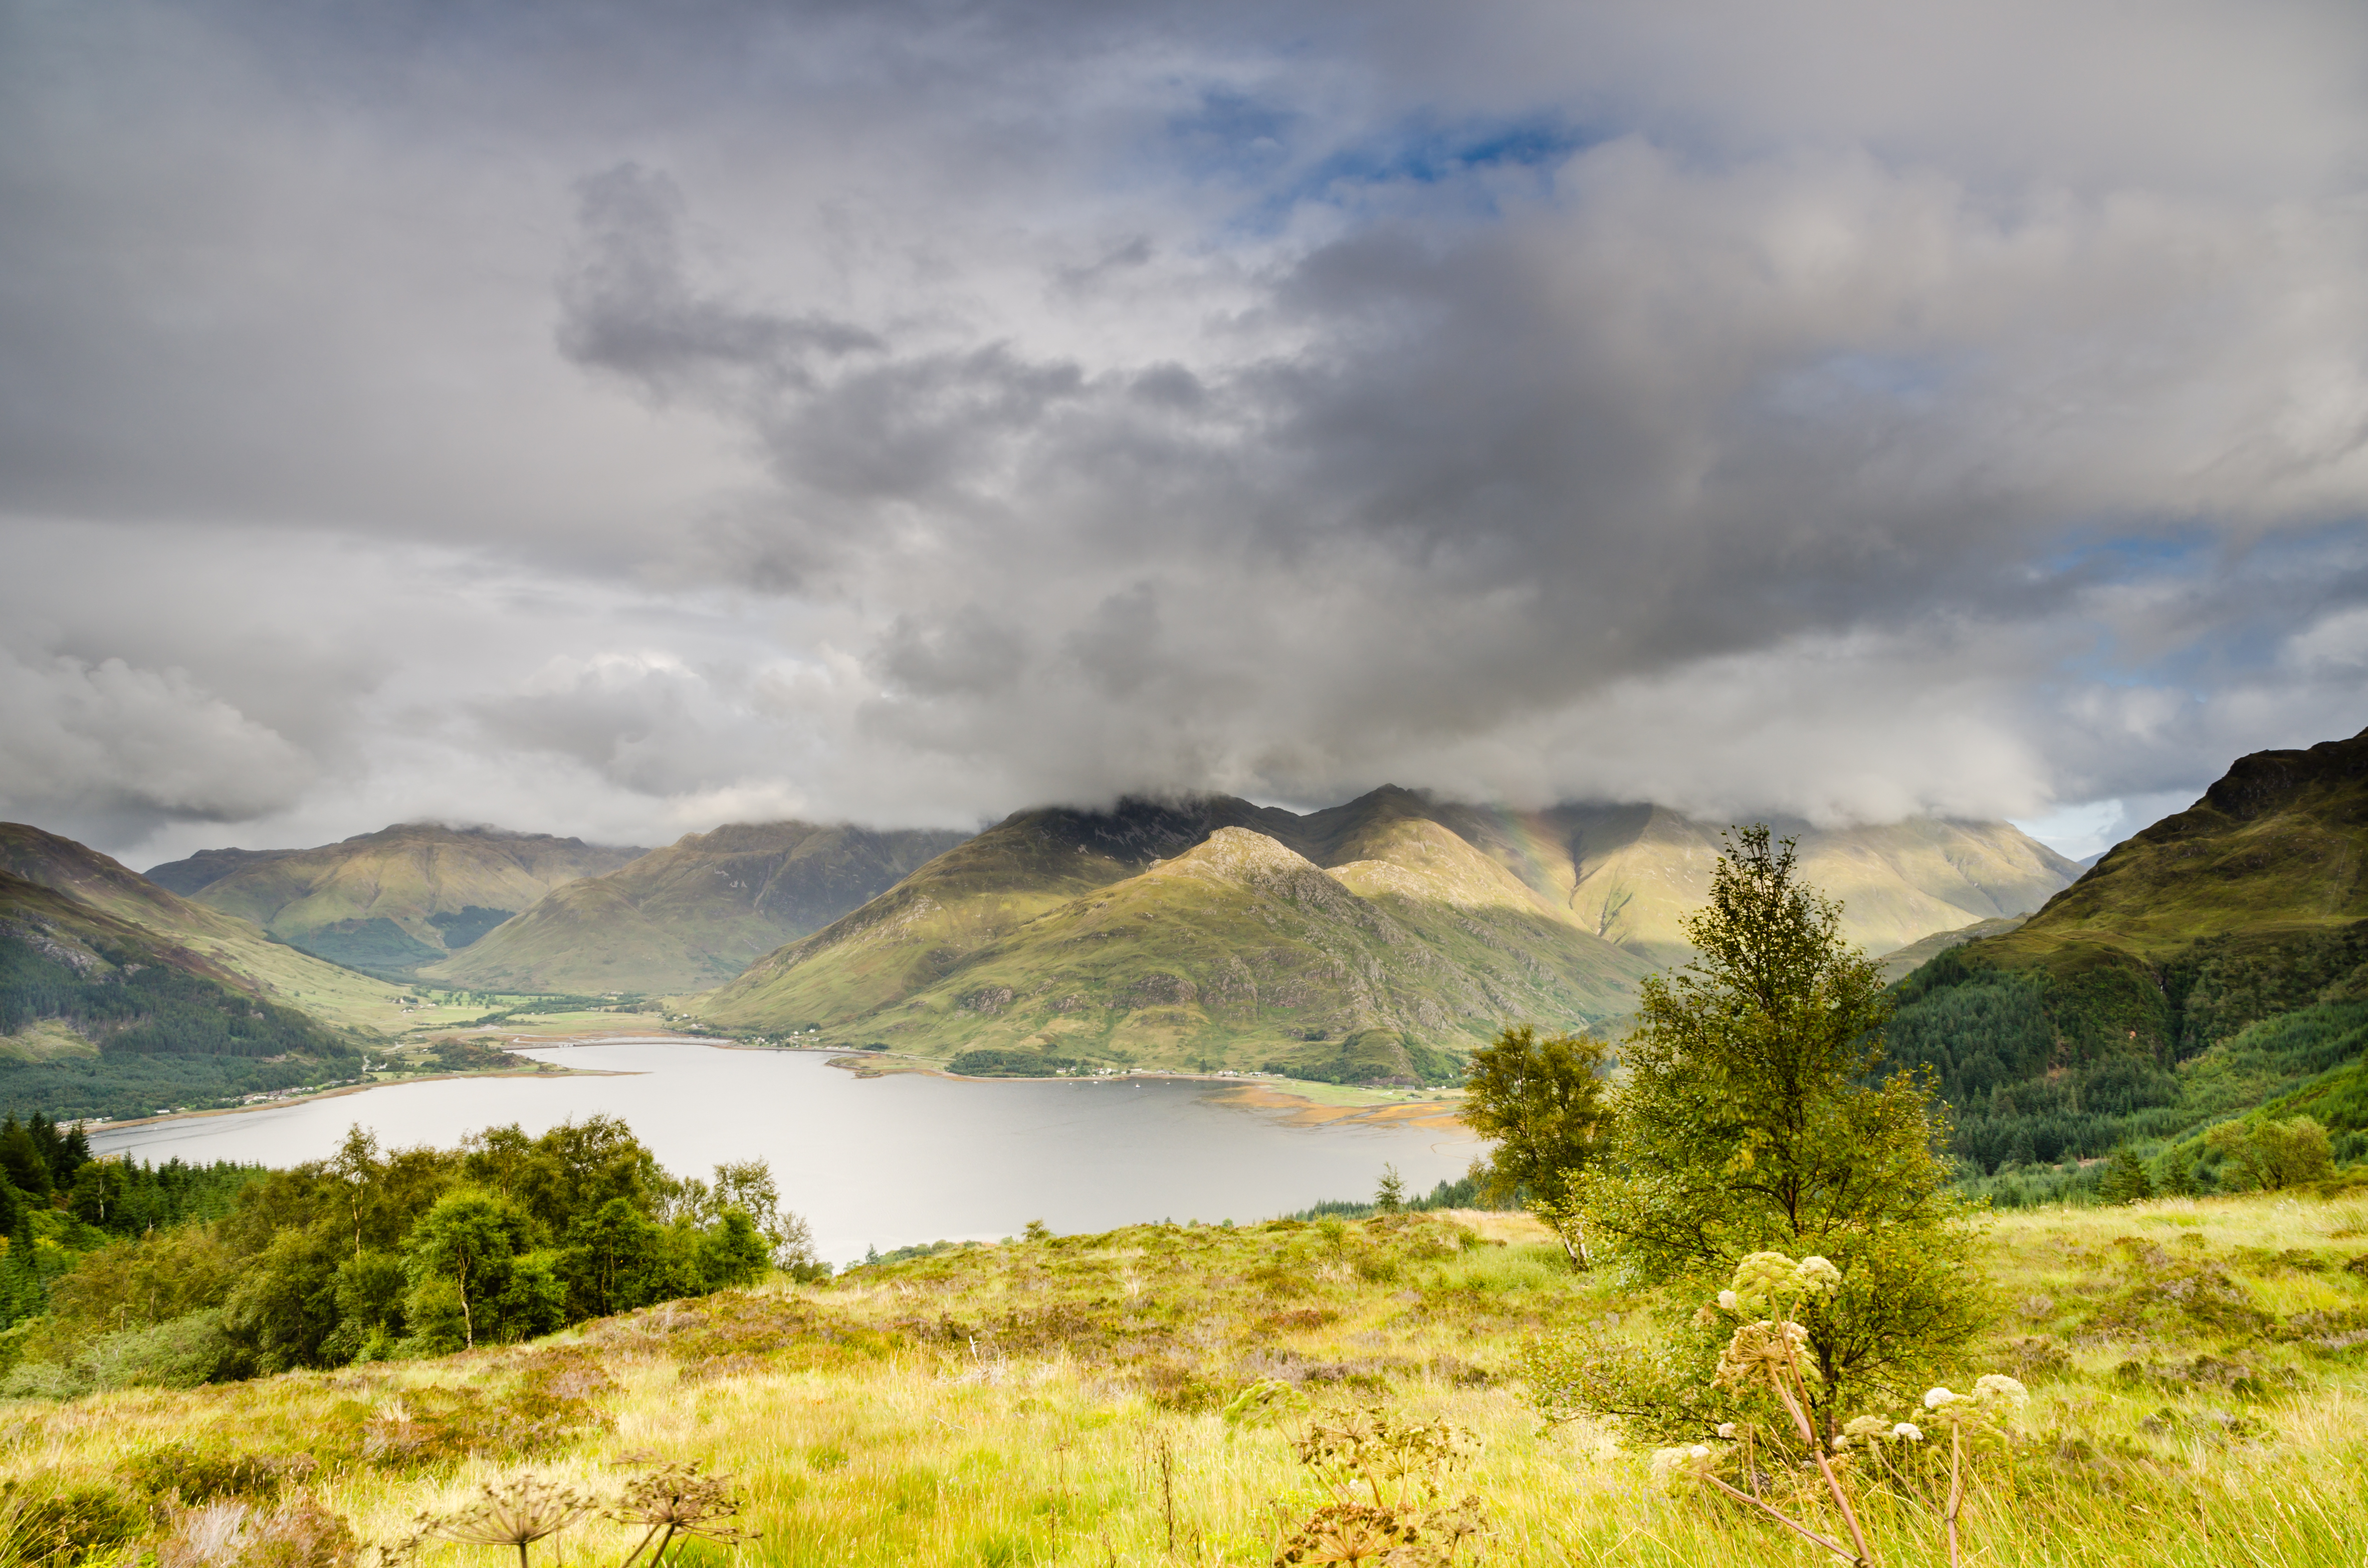 The end of Loch Duich with the Five Sisters peaks